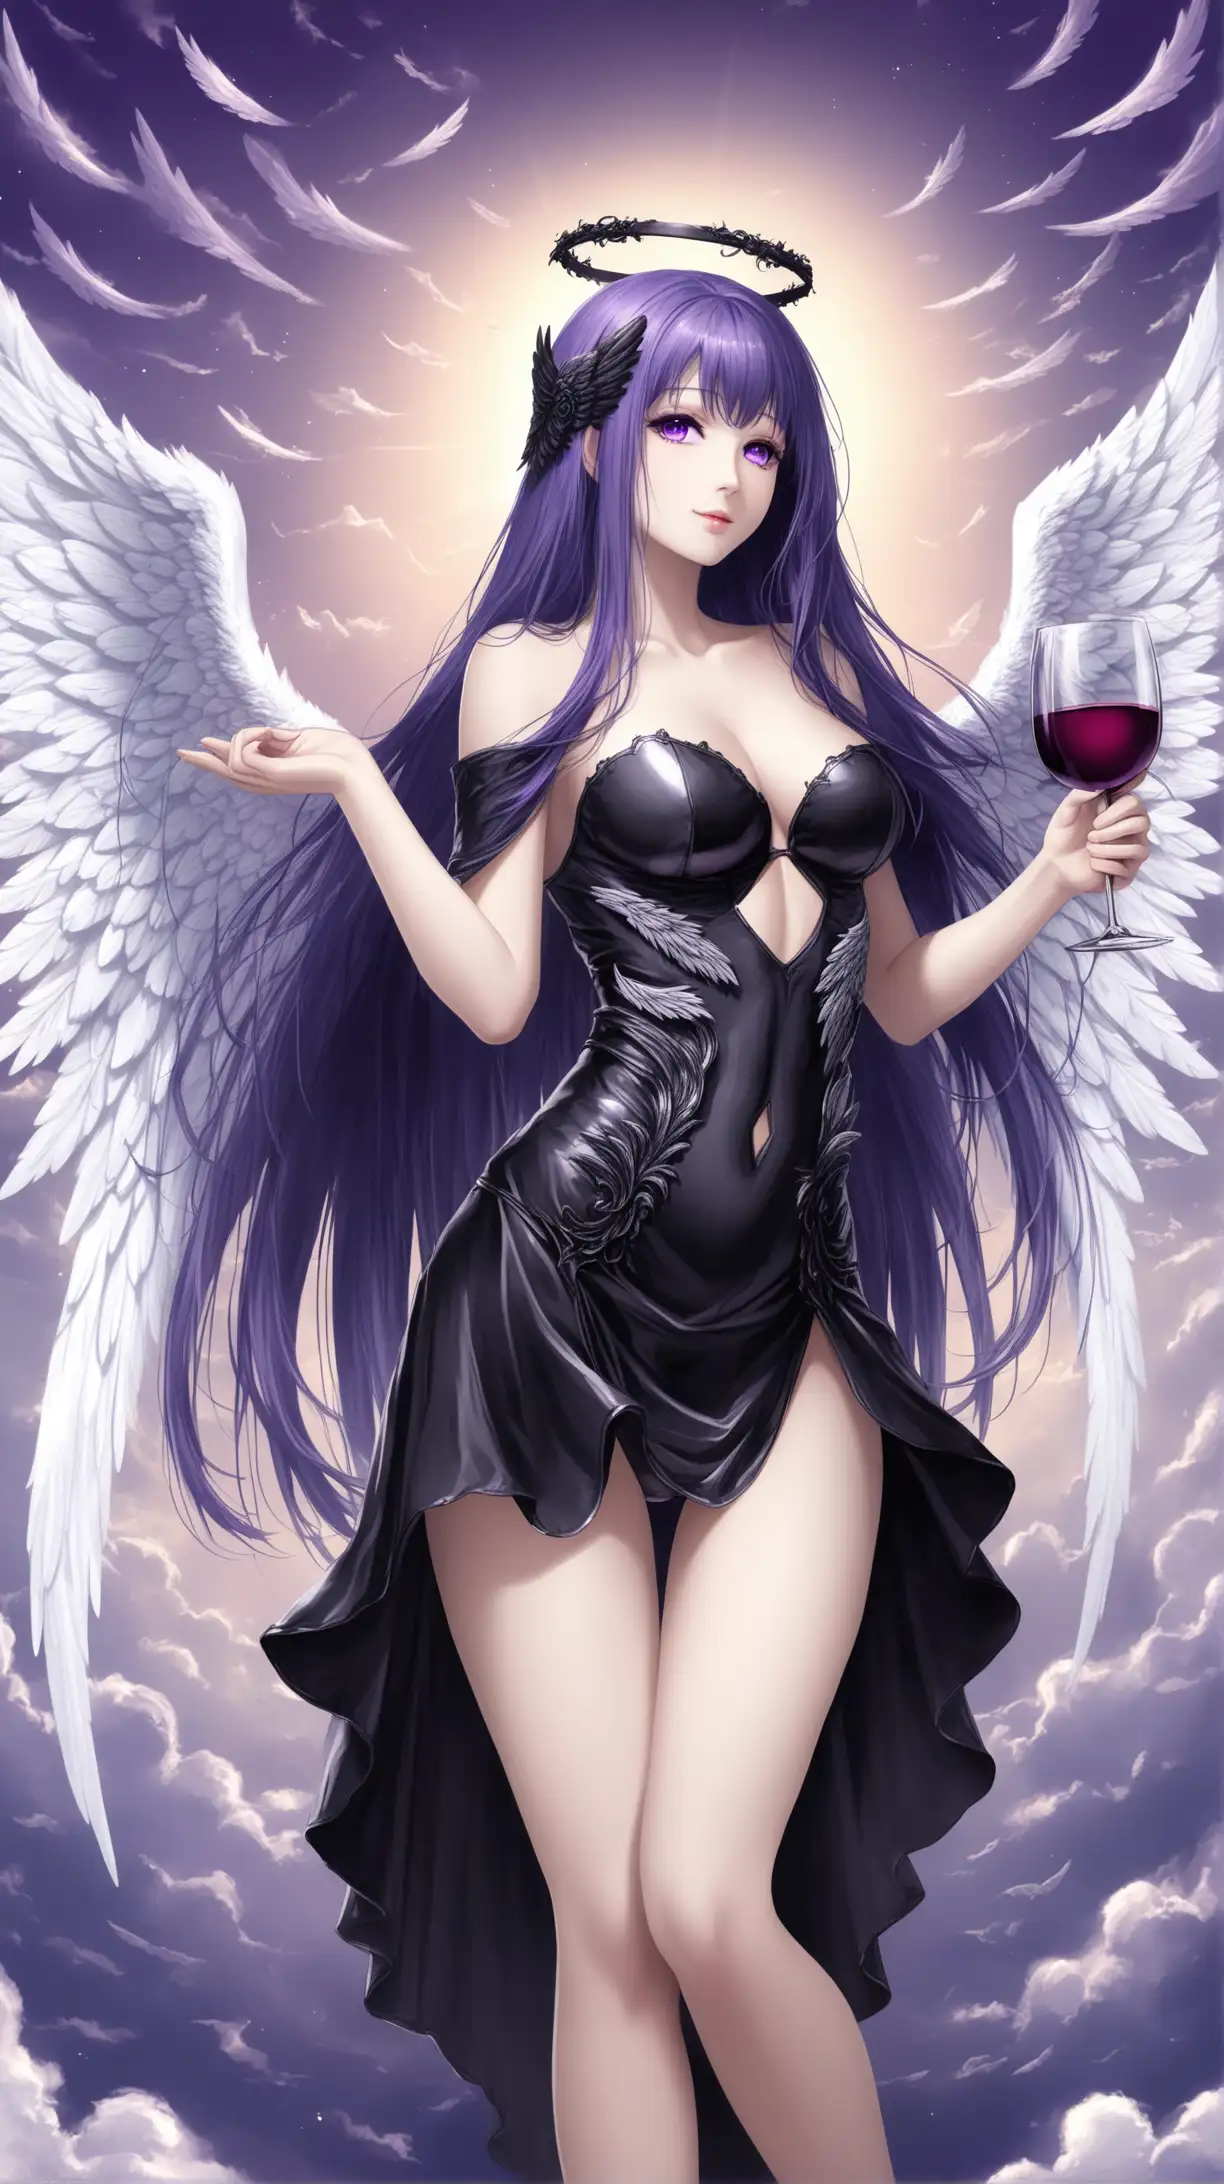 Seductive Angel with Wine Glass Sensual Fantasy Character in Heavenly Setting